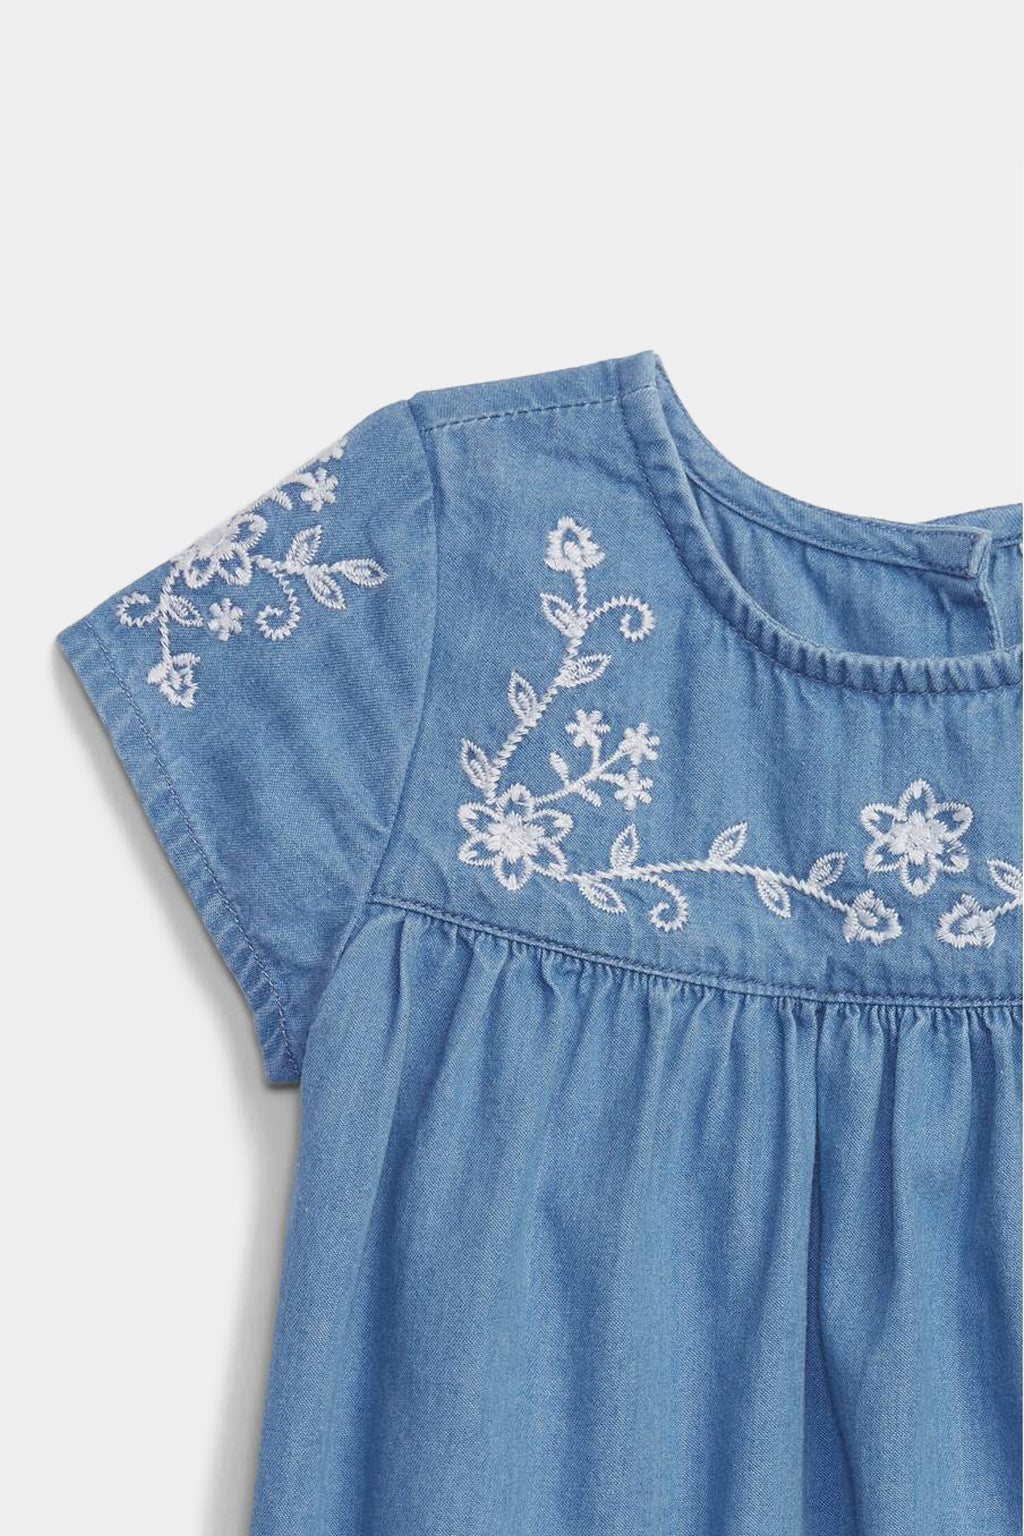 Gap - Baby Embroidered Denim Dress with Washwell